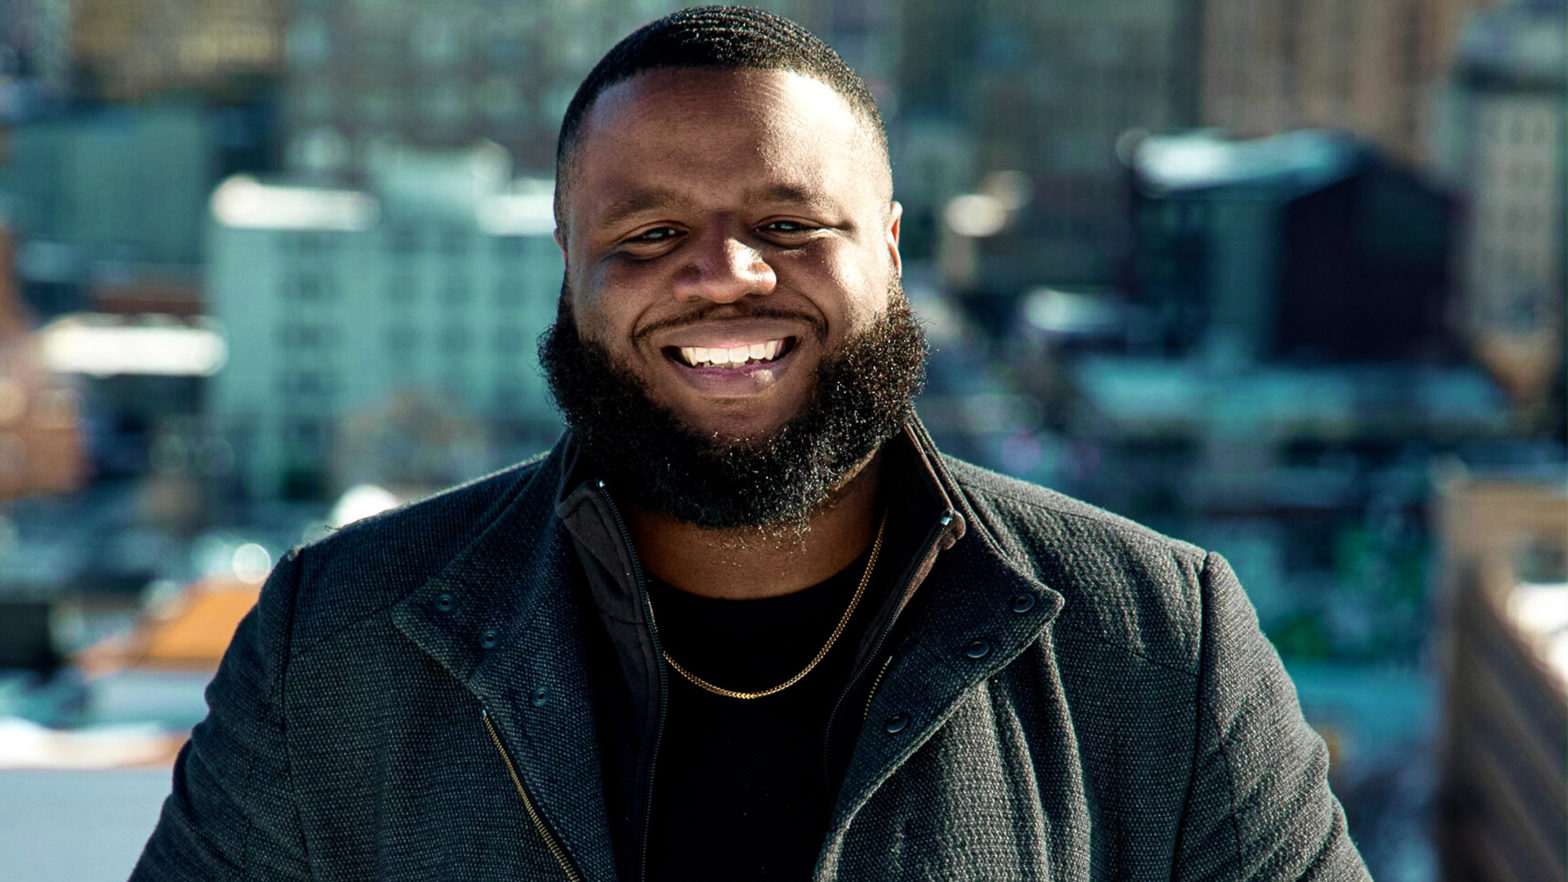 'My Bank Account Was In The Red' — How Jarred McGriff's Knack For Digital Storytelling Landed Him At BET